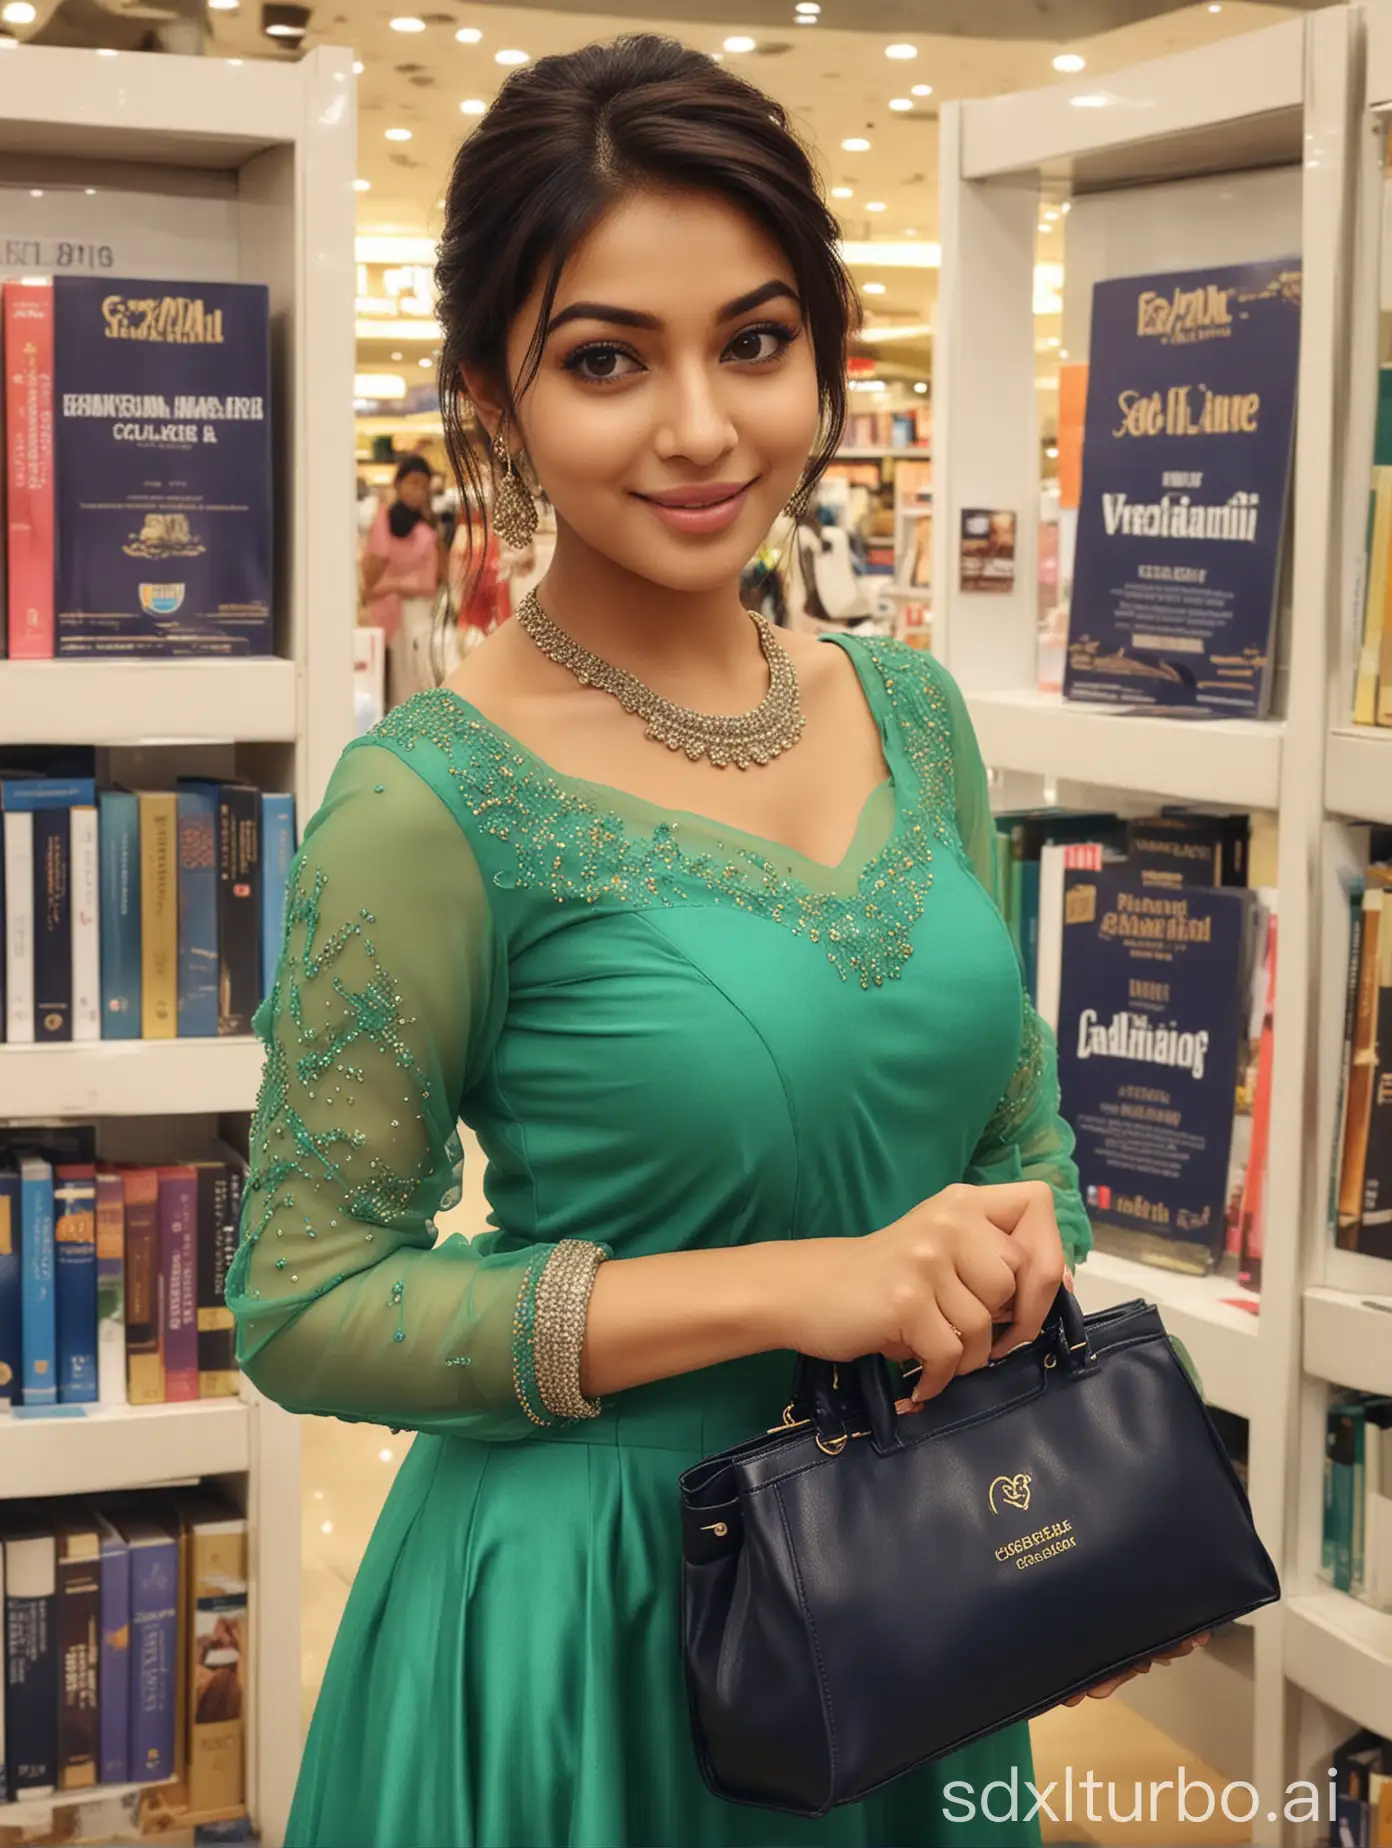 big mall event of company promoting college books and other services, wearing green formal corporate attire, real celebrity female model from Karnataka, happily pointing finger to the side of the promotional banner and promoting. Blended face of Aindrita and Hansika, healthy beautiful face, cheerful young lady, perfect arch eyebrows, almond shaped eyes with thick black kajal applied with wedding eyeliner, strobe glow on face, 19 years college girl, black puff hairstyle with slightly face framing bangs on medium voluminous thick hair, standing in the big Mall with proper lights, black college side bag, and long blue book holding . 12K quality.... luxurious royal pic